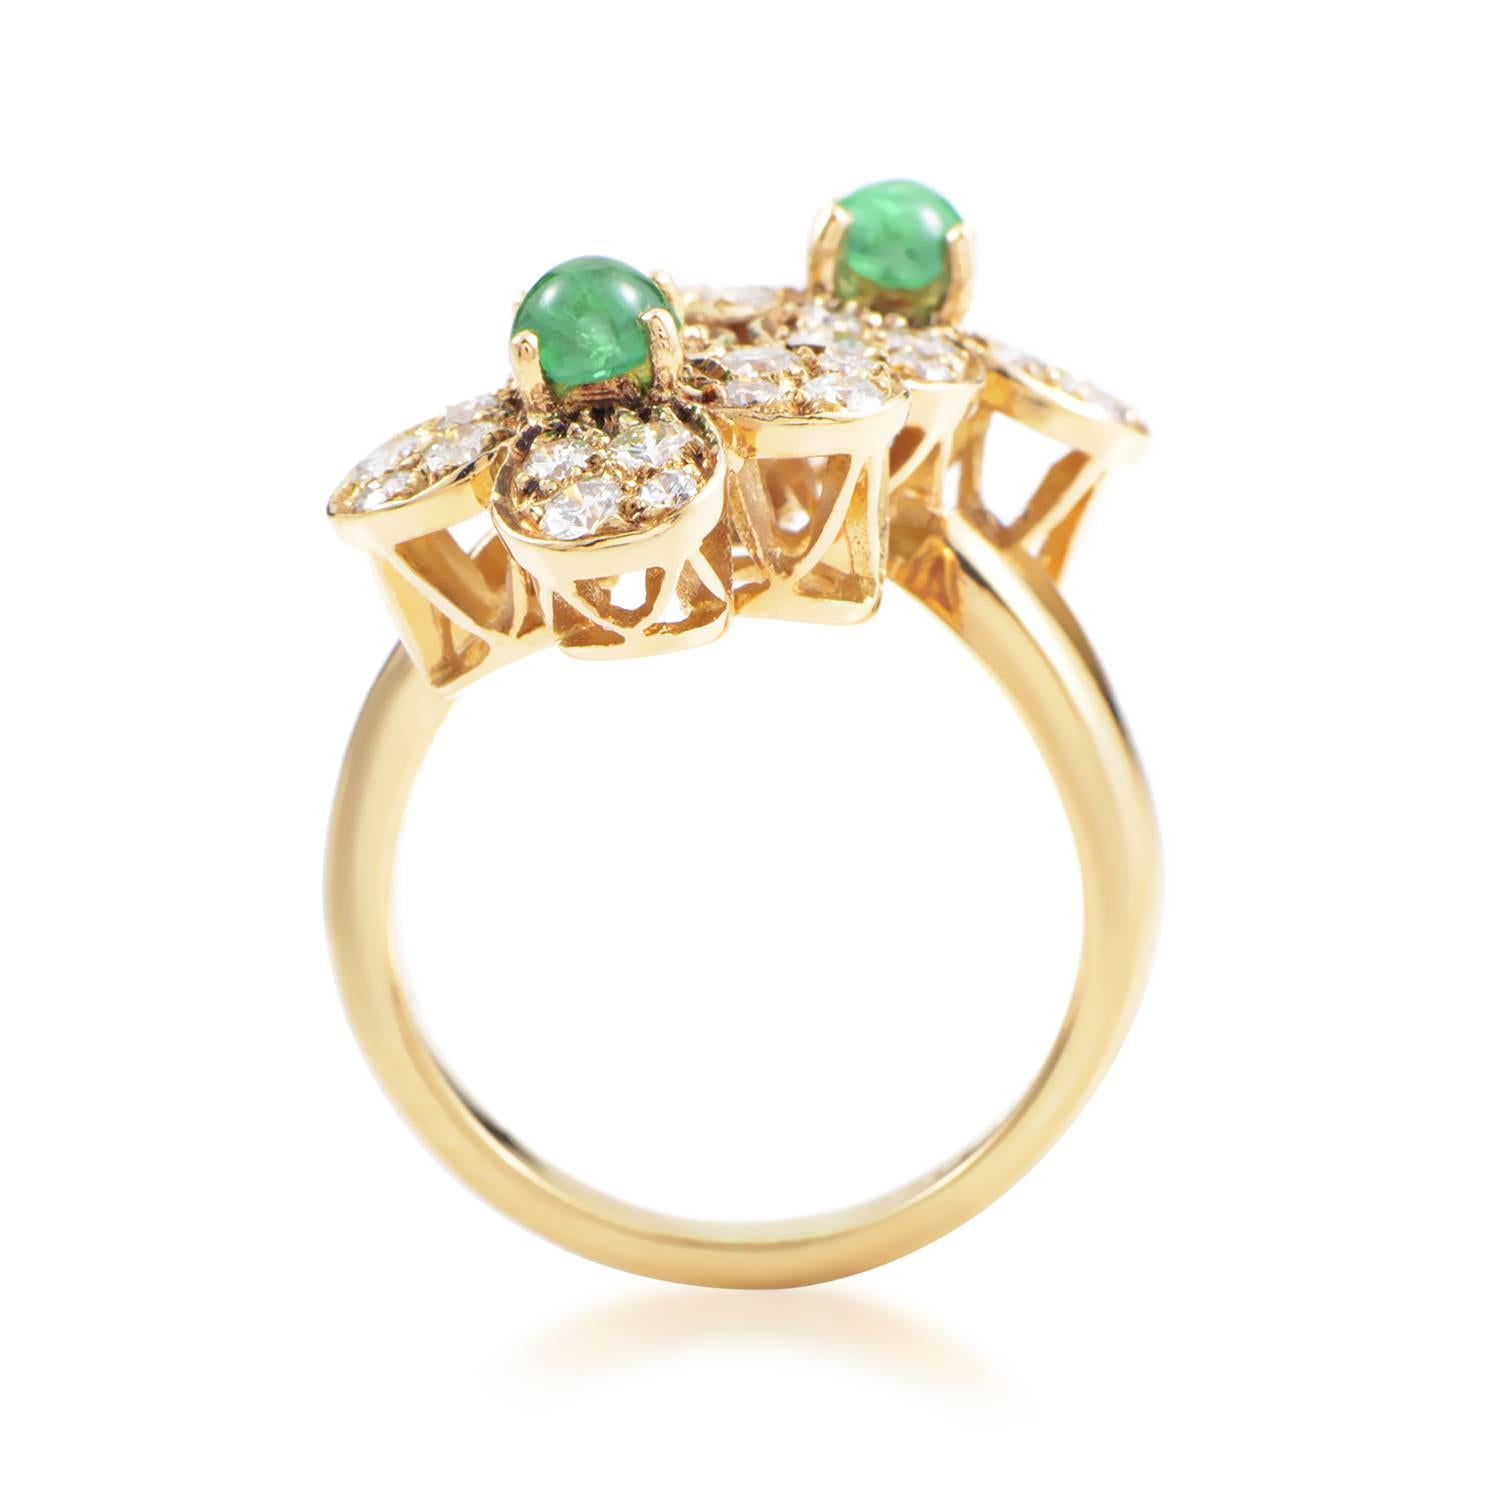 This lovely ring from Van Cleef & Arpels' Trefle collection is the perfect adornment for any situation. The ring is made of 18K yellow gold and boasts two flower motifs paved with .64ct of white diamonds. Lastly, .47ct of emeralds finish off this